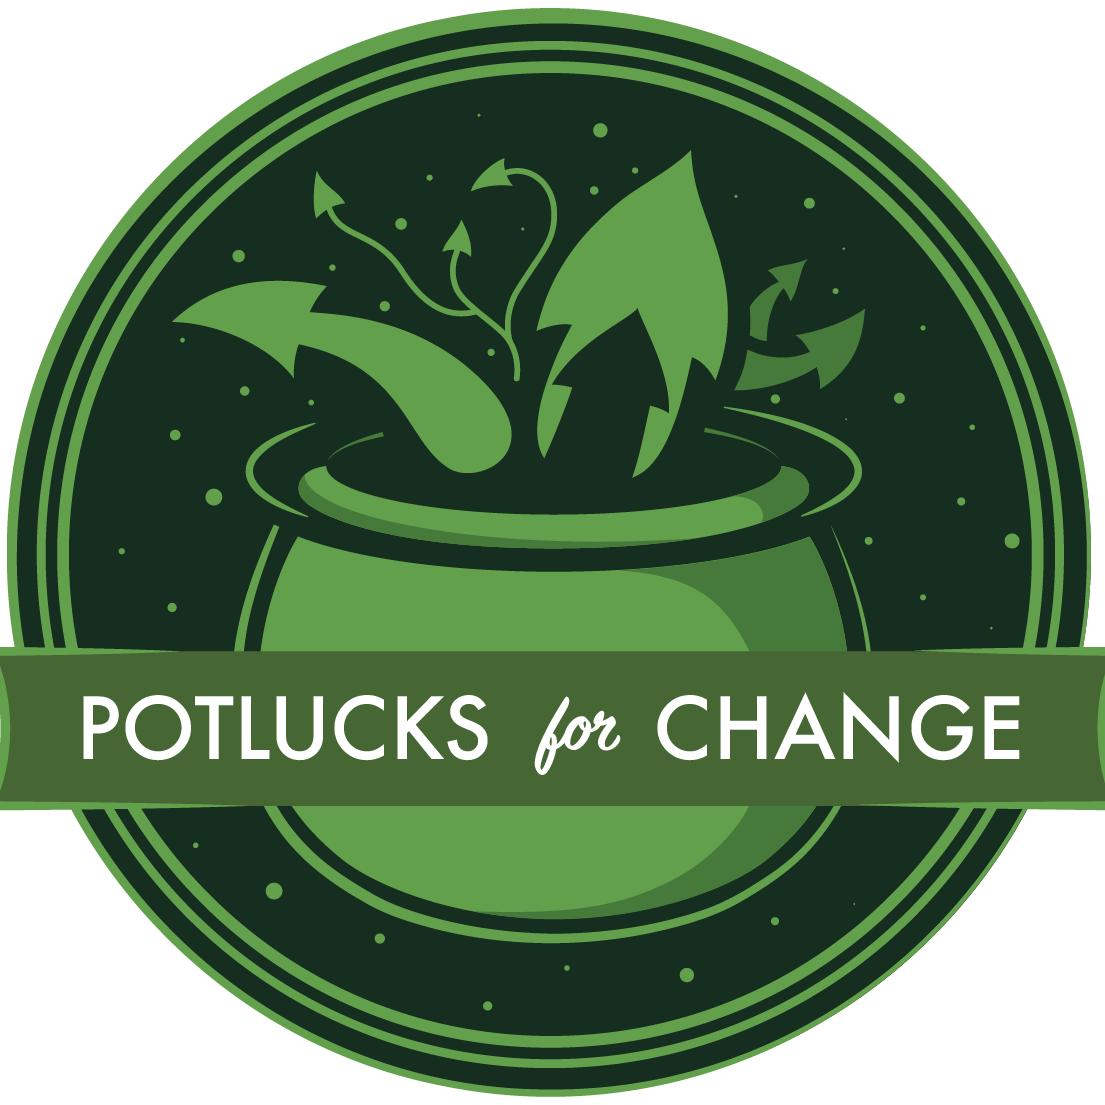 Potlucks for Change: Reproductive Freedom in the US